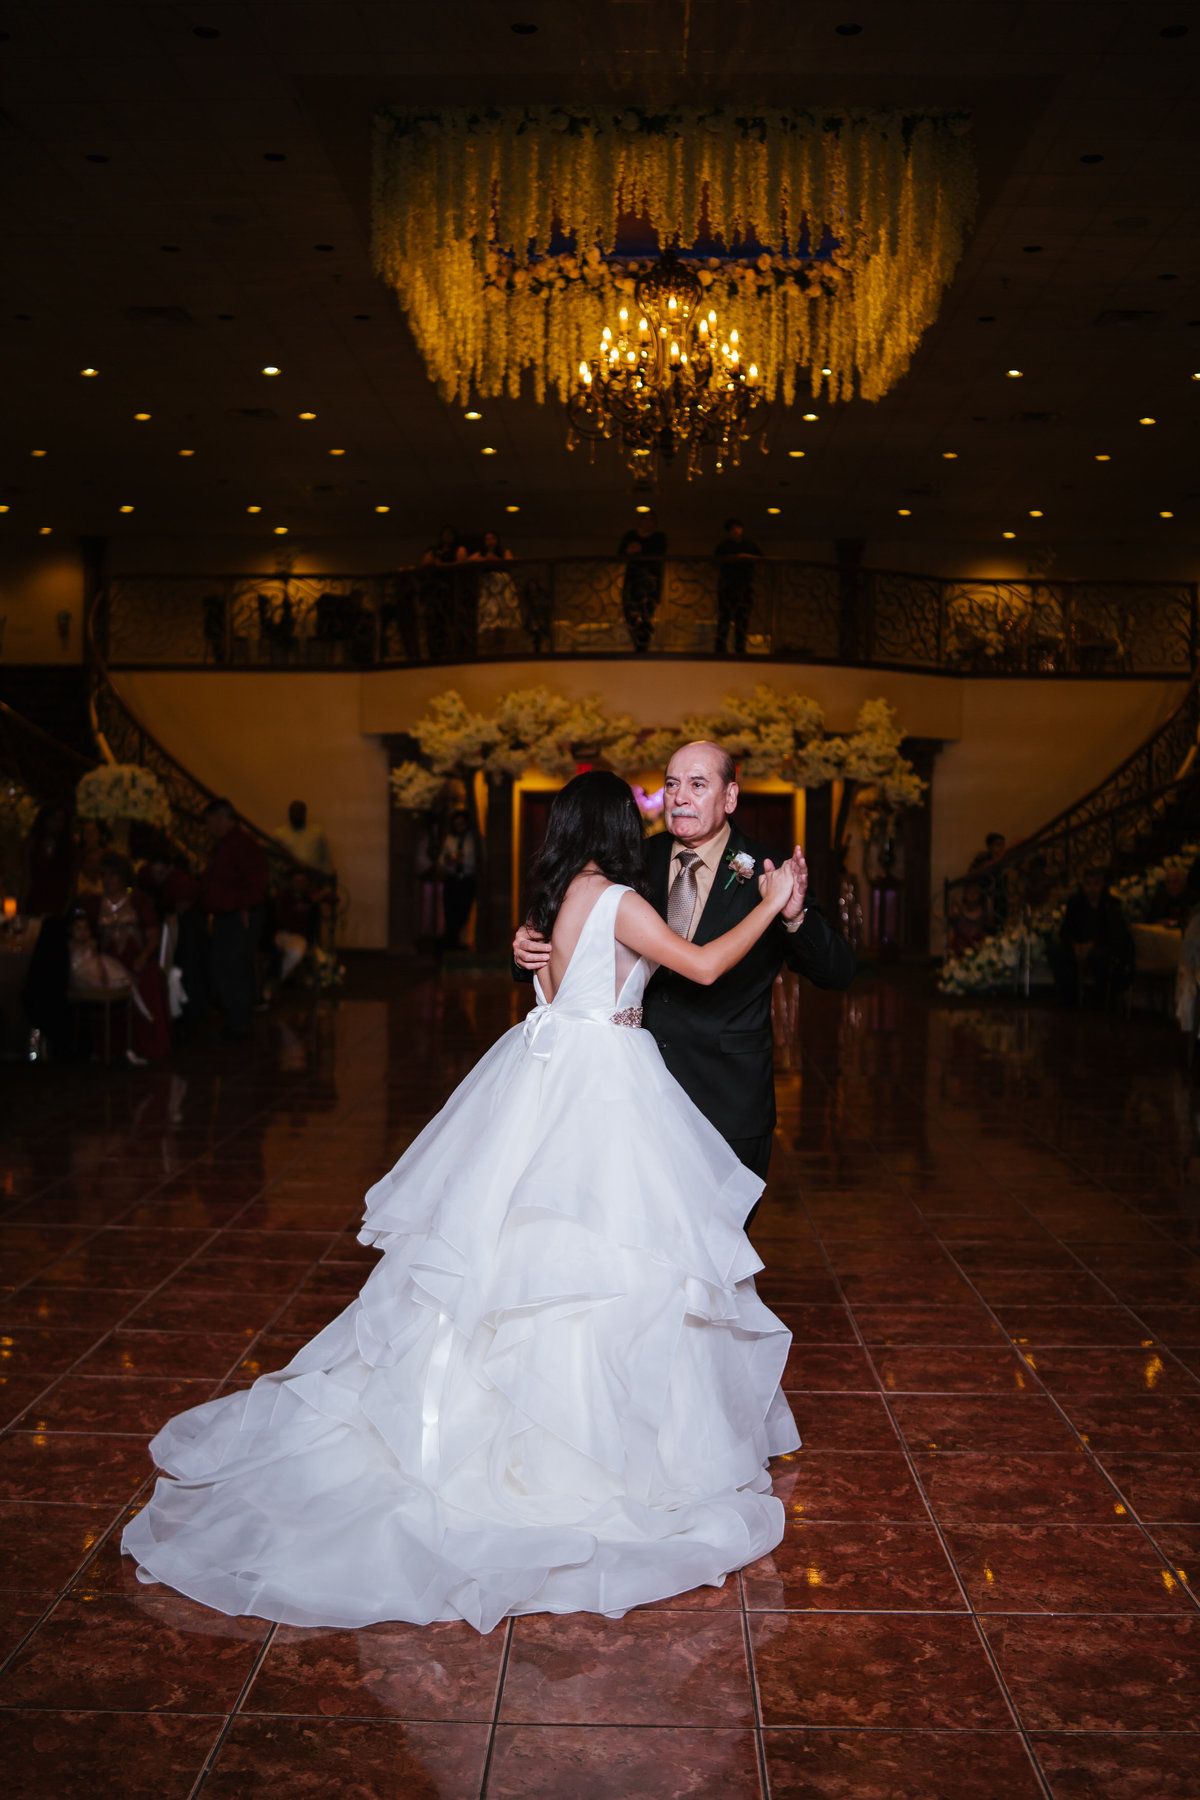 father dances with daughter during wedding reception at The Emporium by Yarlen venue in San Antonio